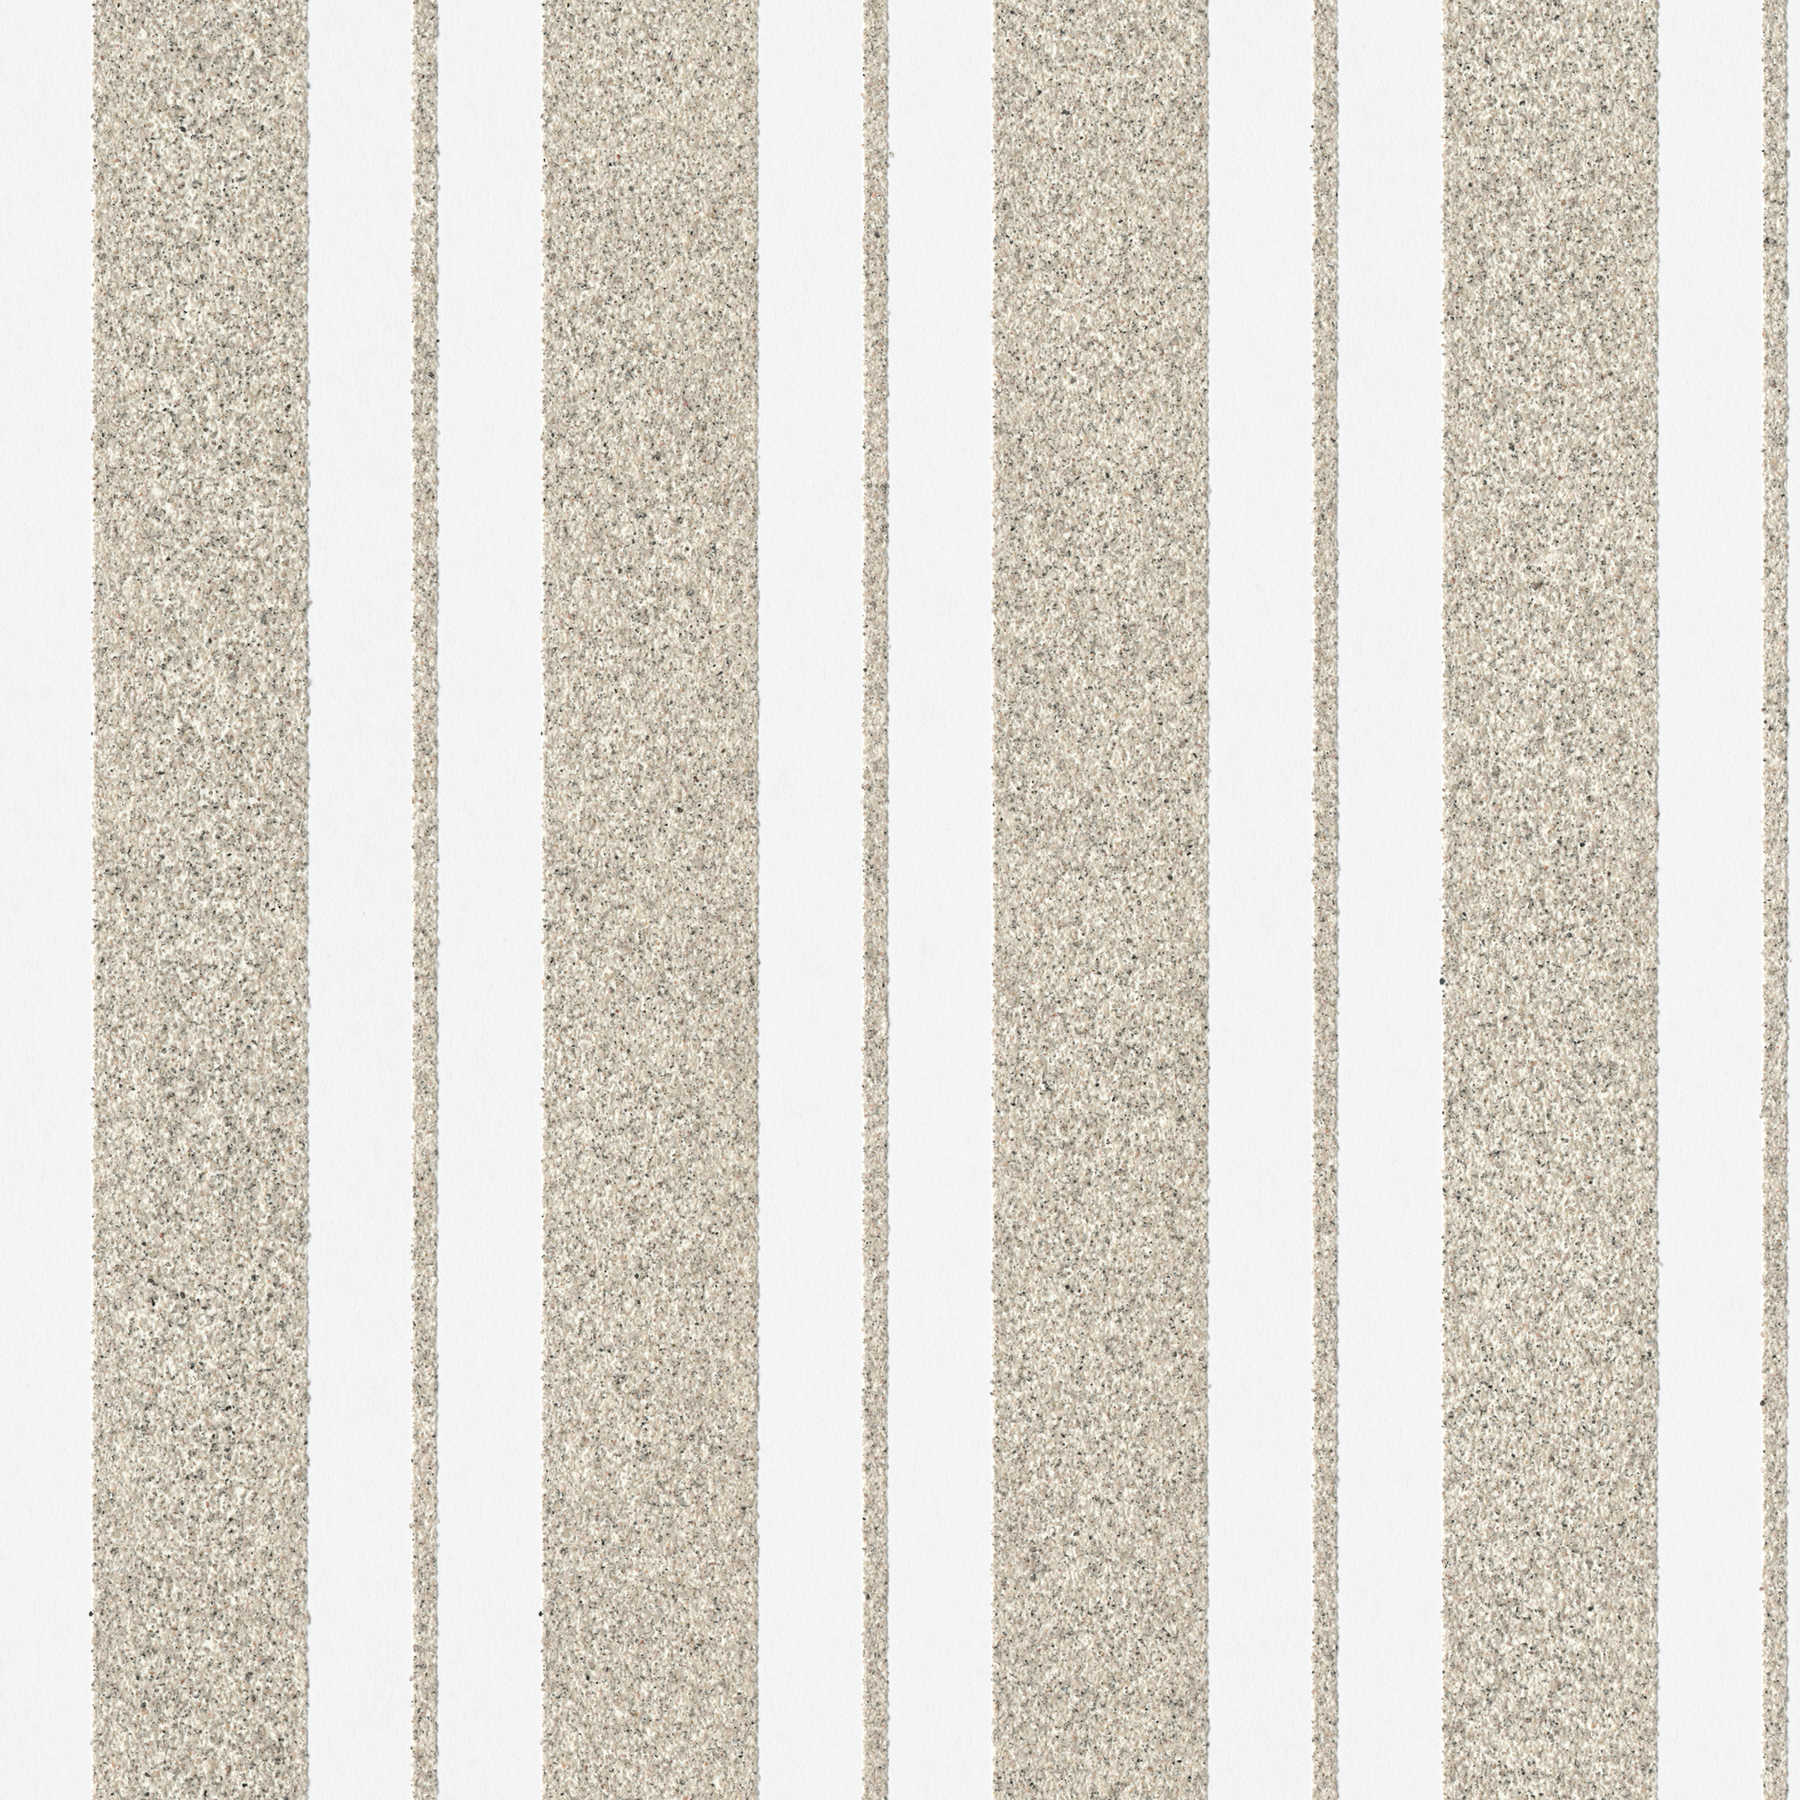 Striped wallpaper with sandy textured pattern - sand, white
